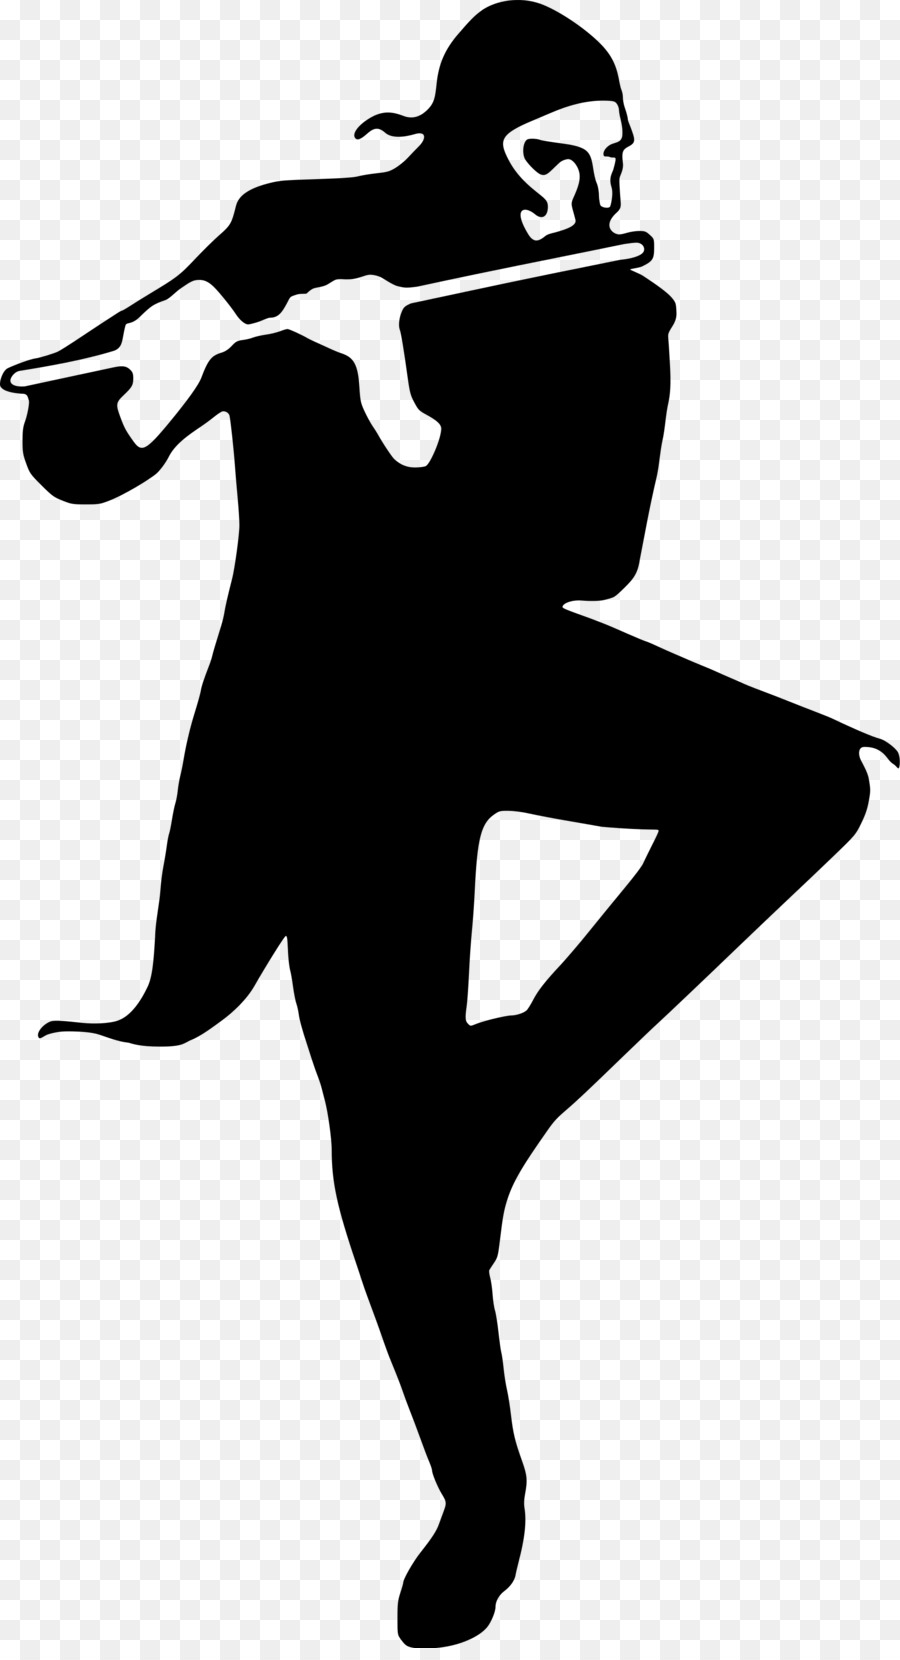 Jethro Tull Musician Aqualung Concert Singer-songwriter - band silhouette png download - 2000*3662 - Free Transparent  png Download.